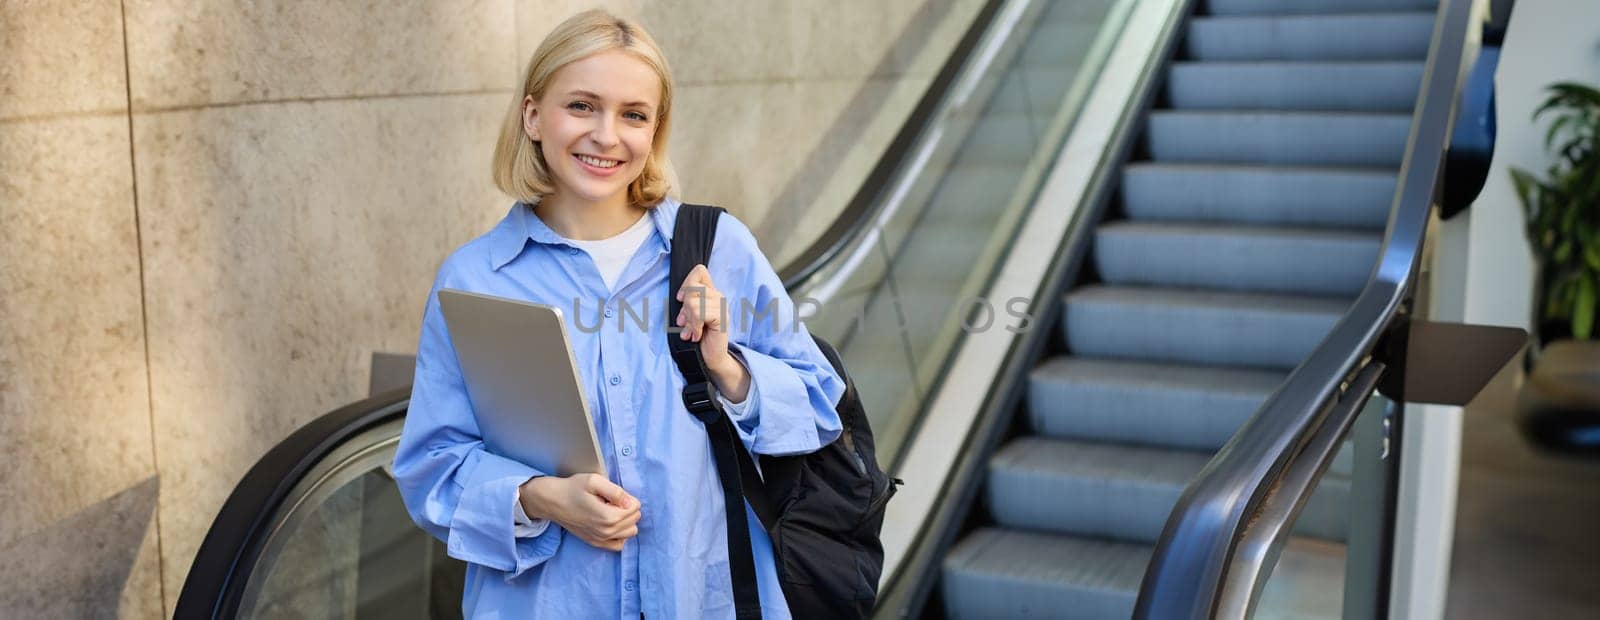 Concept of education and people. Young woman with backpack, carries laptop in hand, standing near escalator, going to tube, on her way to work on university.